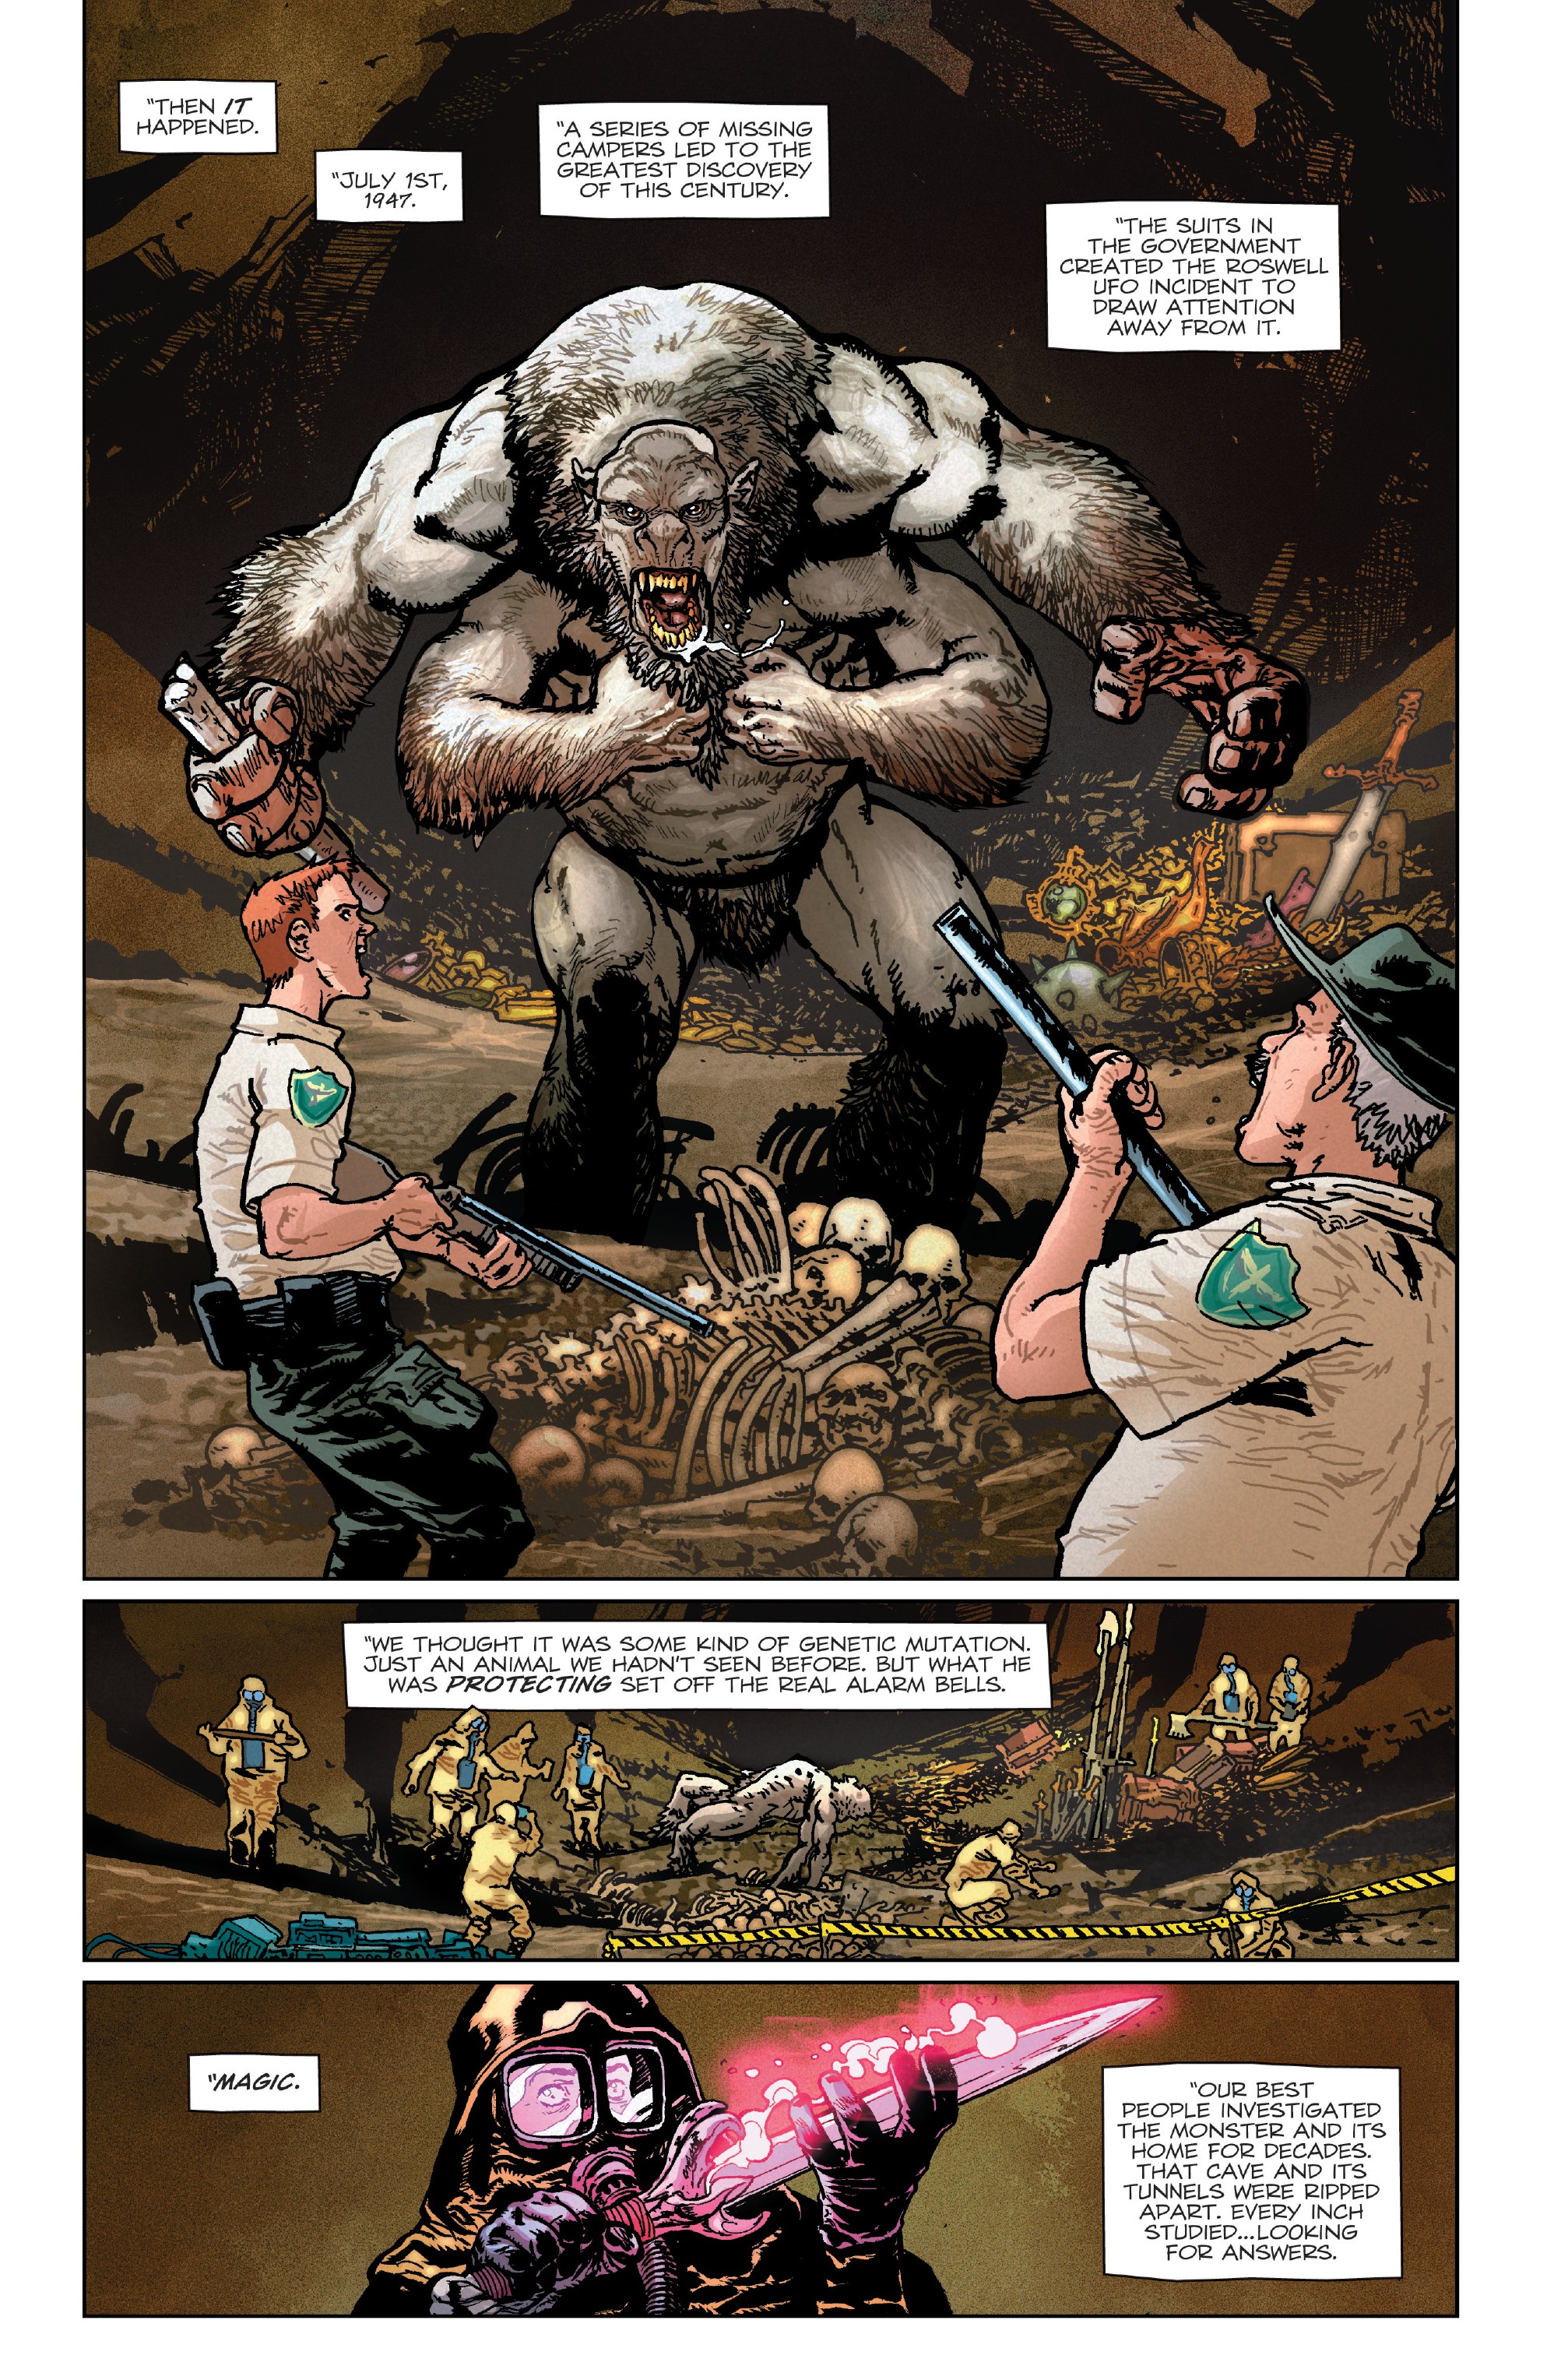 Birthright (2014-): Chapter 36 - Page 4